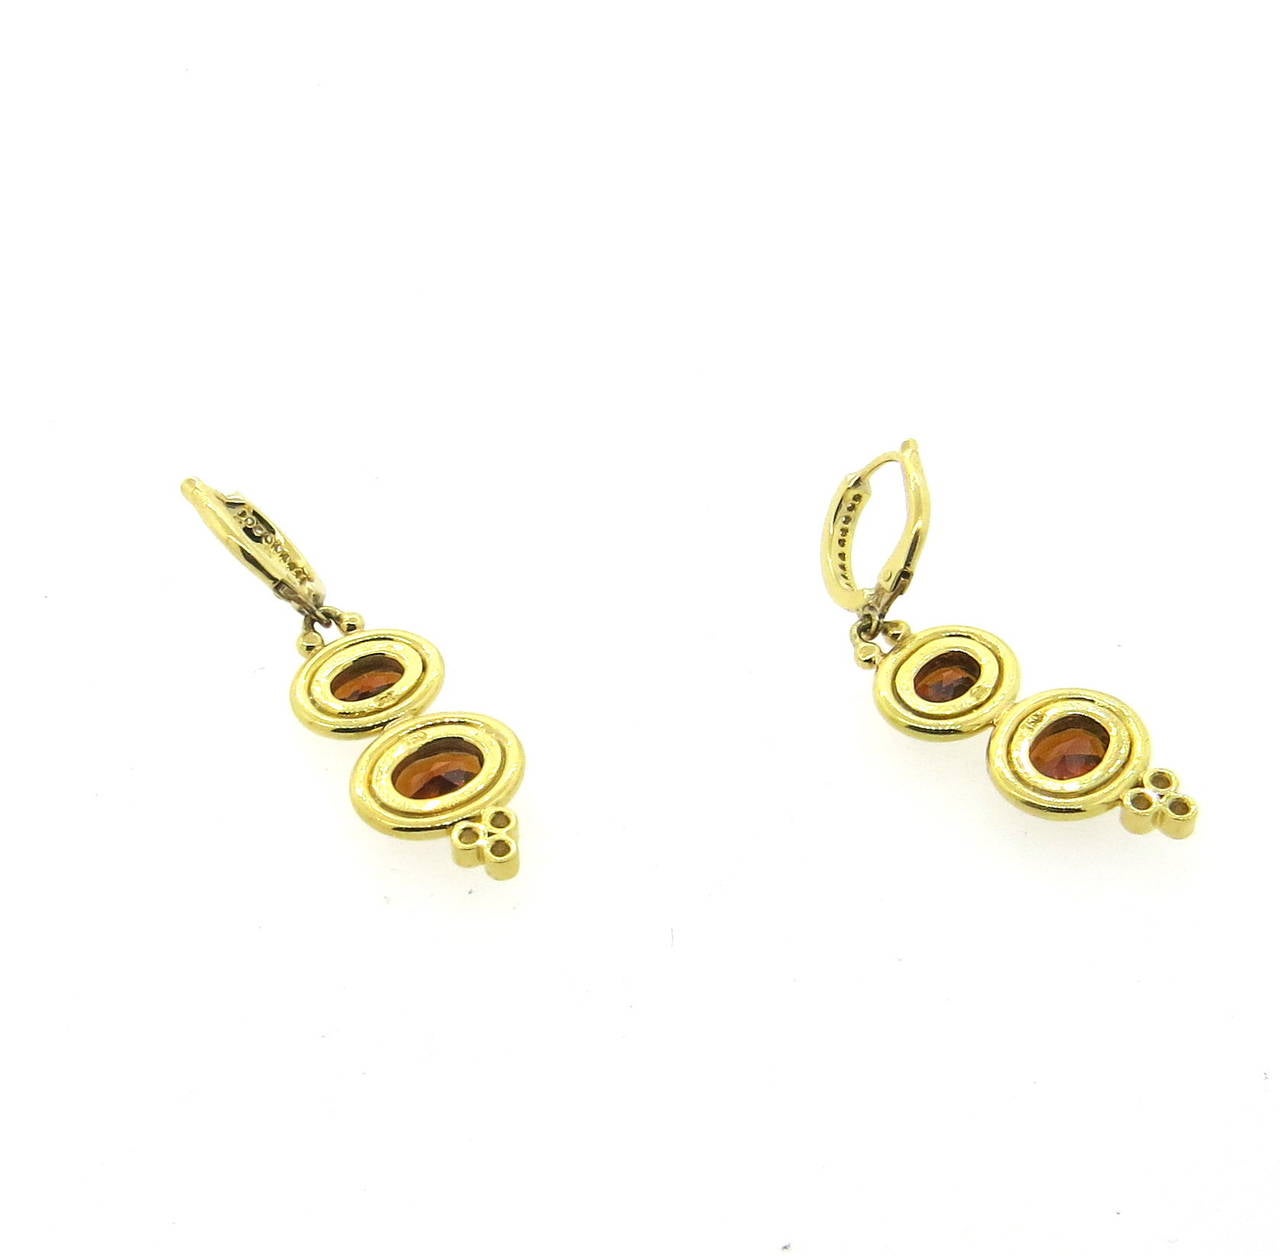 A pair of 18k yellow gold earrings set with Madeira citrine and approximately 0.22ctw of G/VS diamonds.  Crafted by Temple St. Clair, the earrings measure 41mm x 12mm and weigh 11.5 grams.  The earrings currently retail for $4950